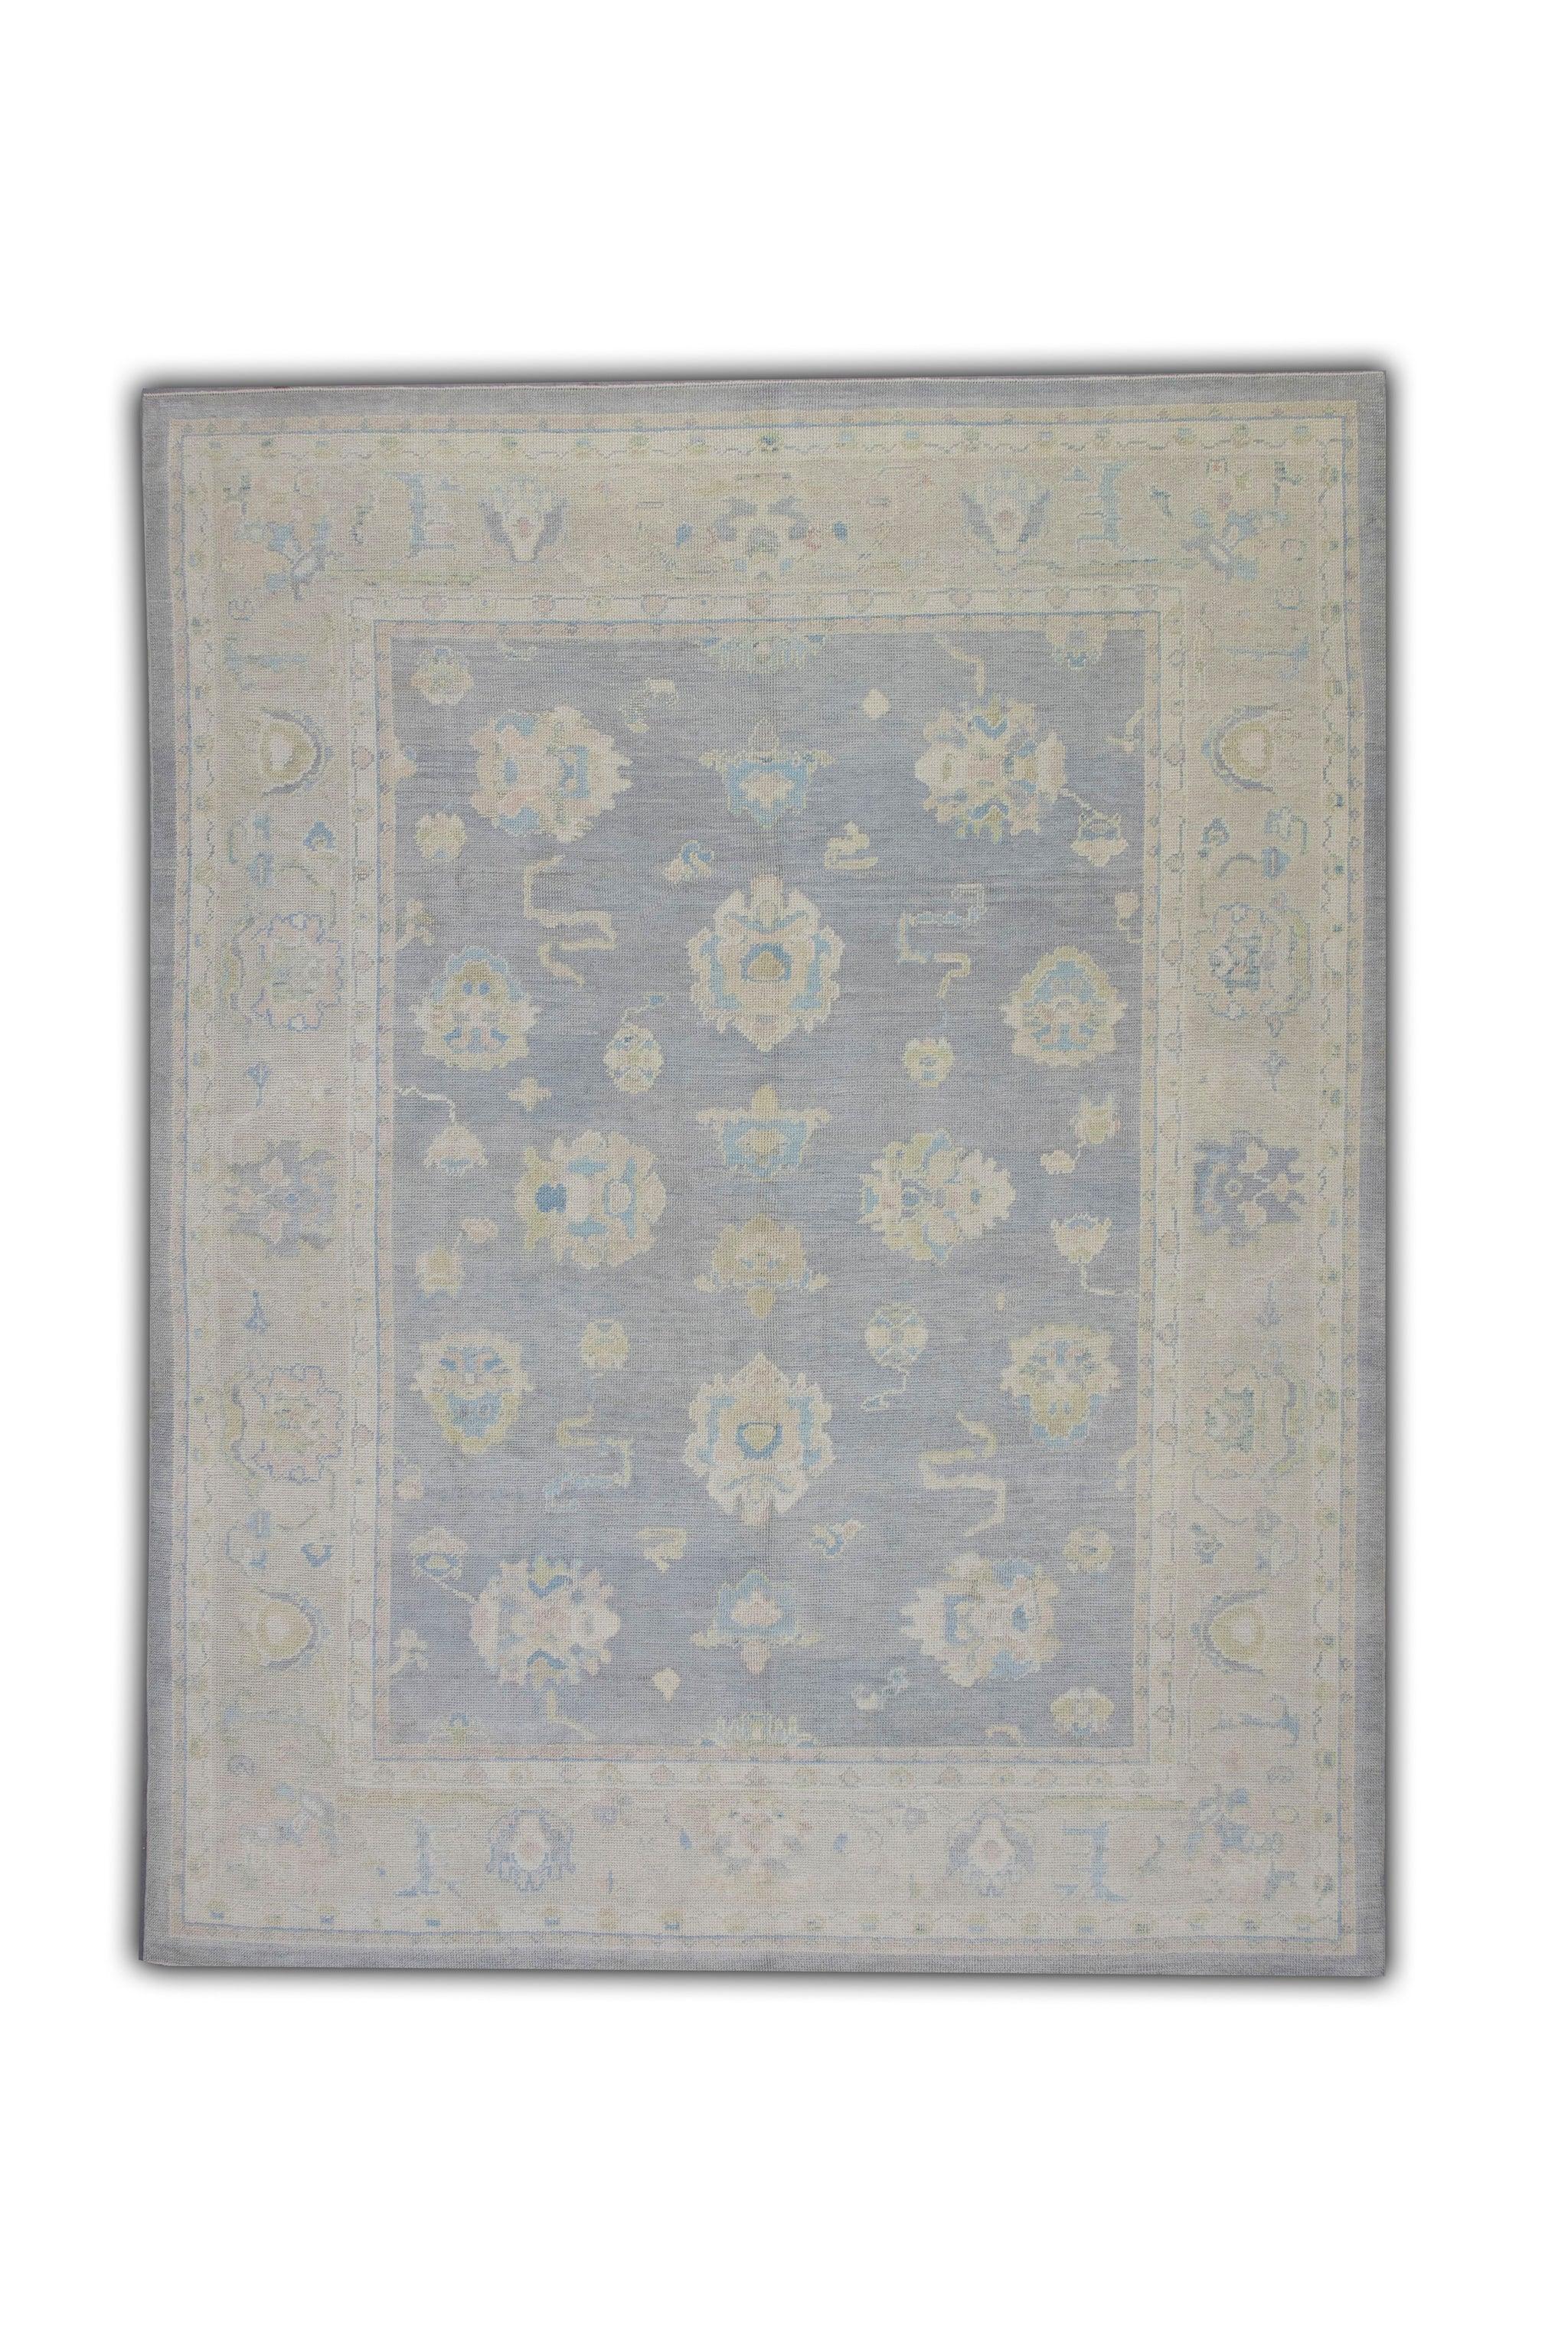 Blue and Cream Floral Handwoven Wool Turkish Oushak Rug 8' x 10'4